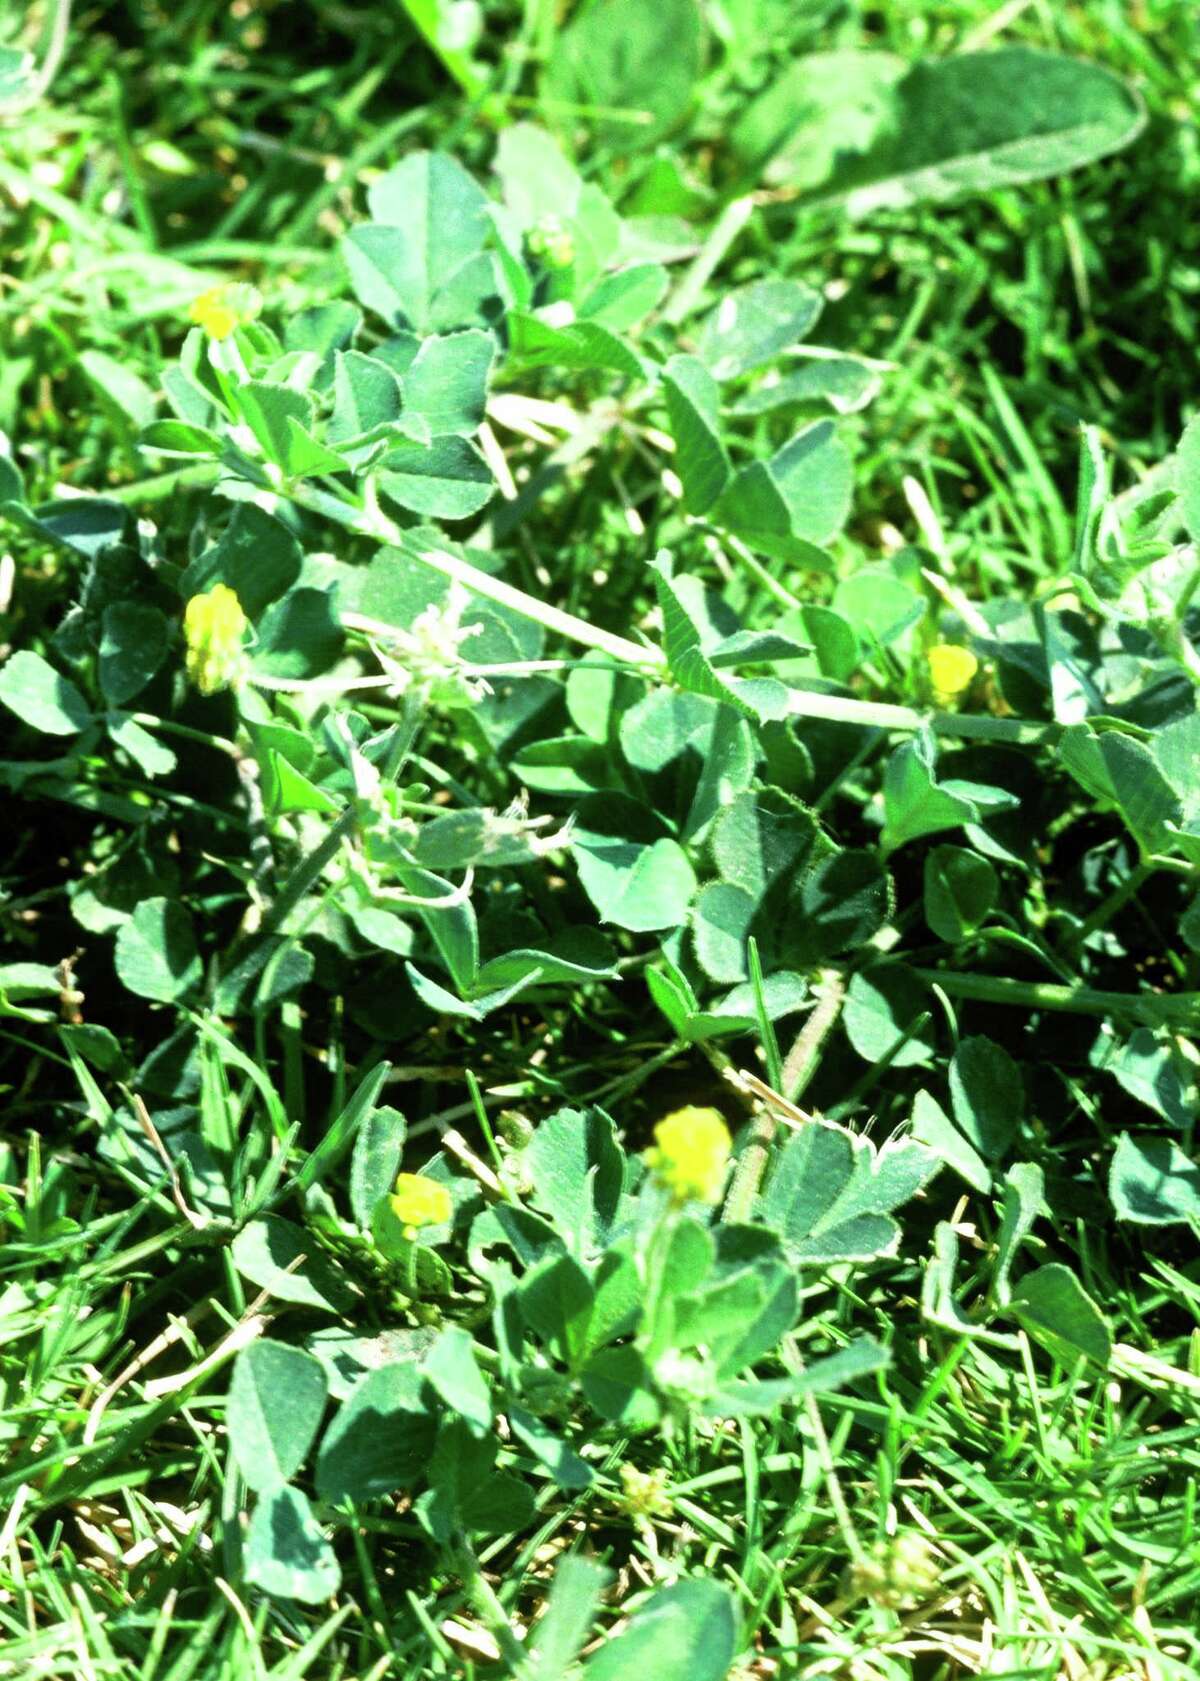 Clover is fairly easily eliminated with the 2,4-D spray.